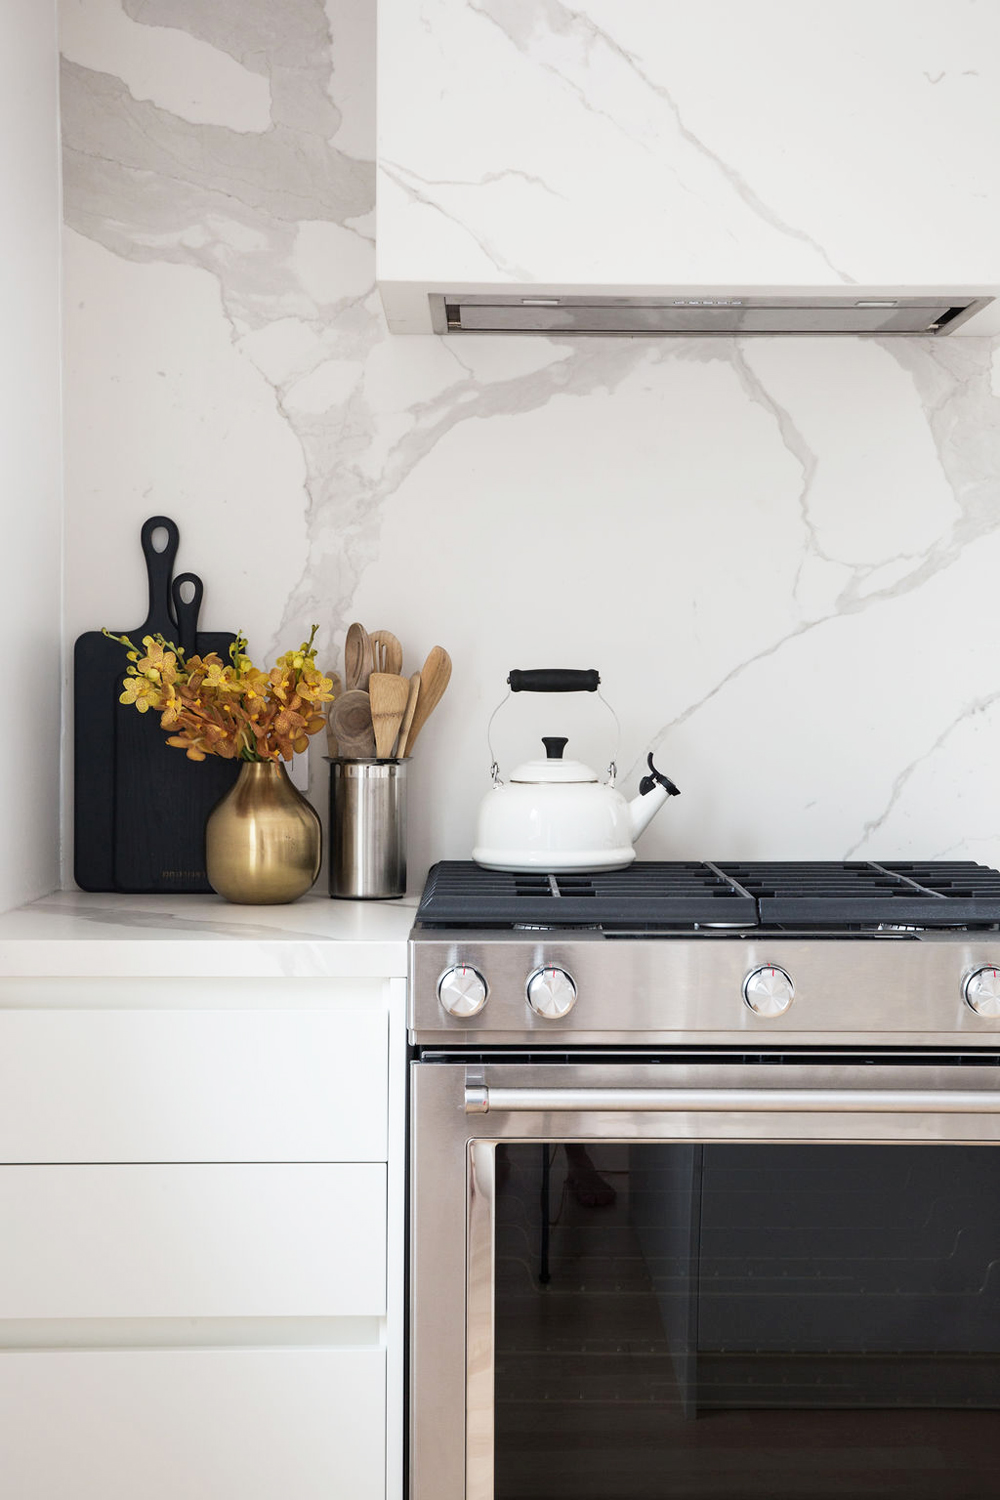 A clutter-free kitchen featuring metallic hardware and a minimalist approach